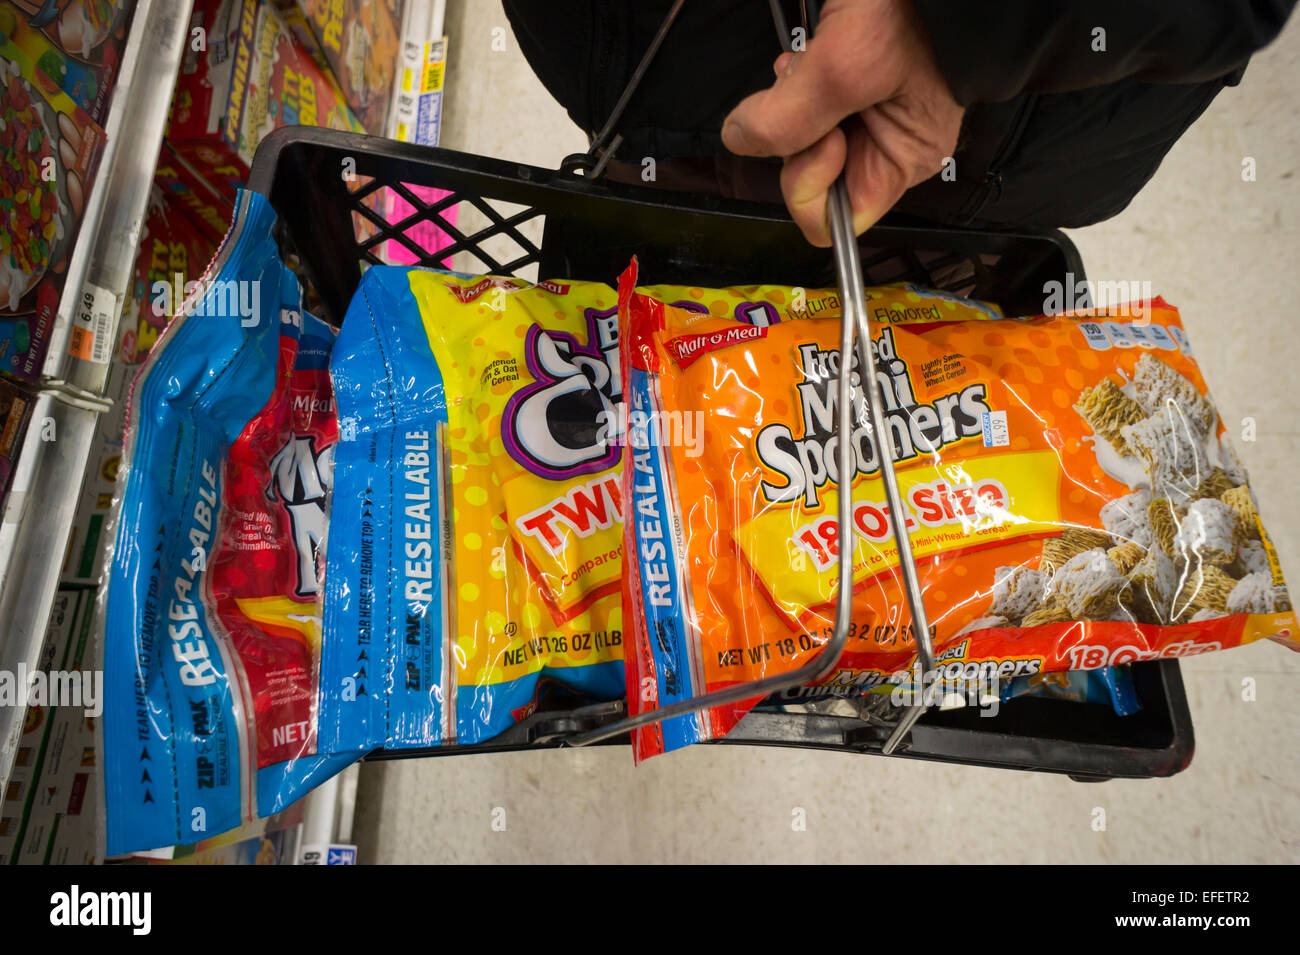 A shopper fills her basket with bags of MOM Brands (formerly Malt-O-Meal) sugary breakfast cereals in a supermarket in New York on Tuesday, January 27, 2015. Post Holdings whose brands include Grape Nuts and Raisin Bran is buying MOM Brands, manufacturer of iconic cereals such as Marshmallow Mateys and Golden Puffs in a deal worth $1.15 billion. The acquisition gives Post and 18 percent share of the breakfast cereal market after Kellogg's at 32% and General Mills at 31%. (© Richard B. Levine) Stock Photo